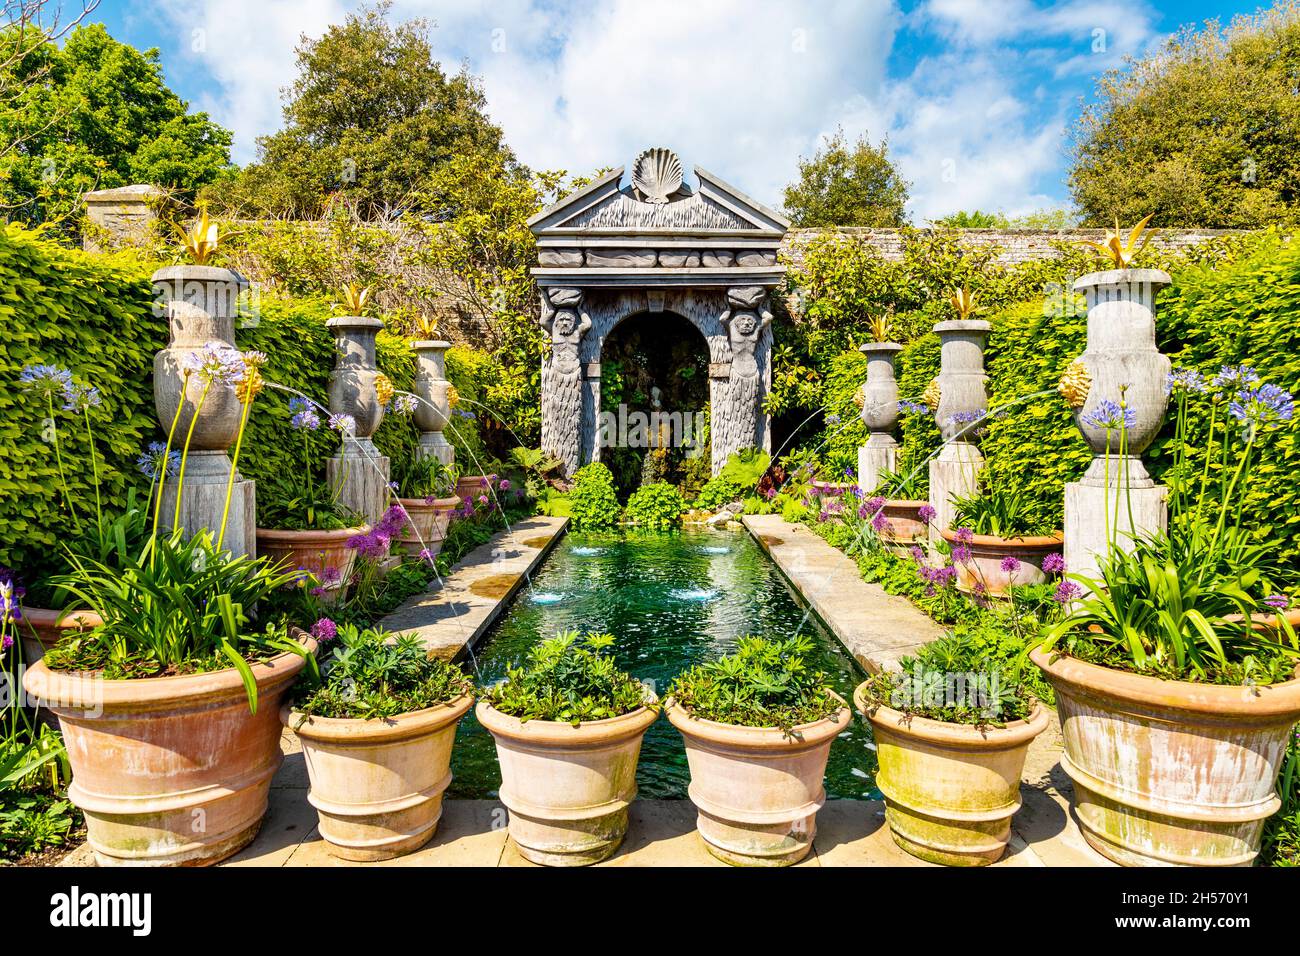 Fountain at the Jacobean style Collector Earl’s Garden with wooden oak urns at Arundel Castle, Arundel, UK Stock Photo